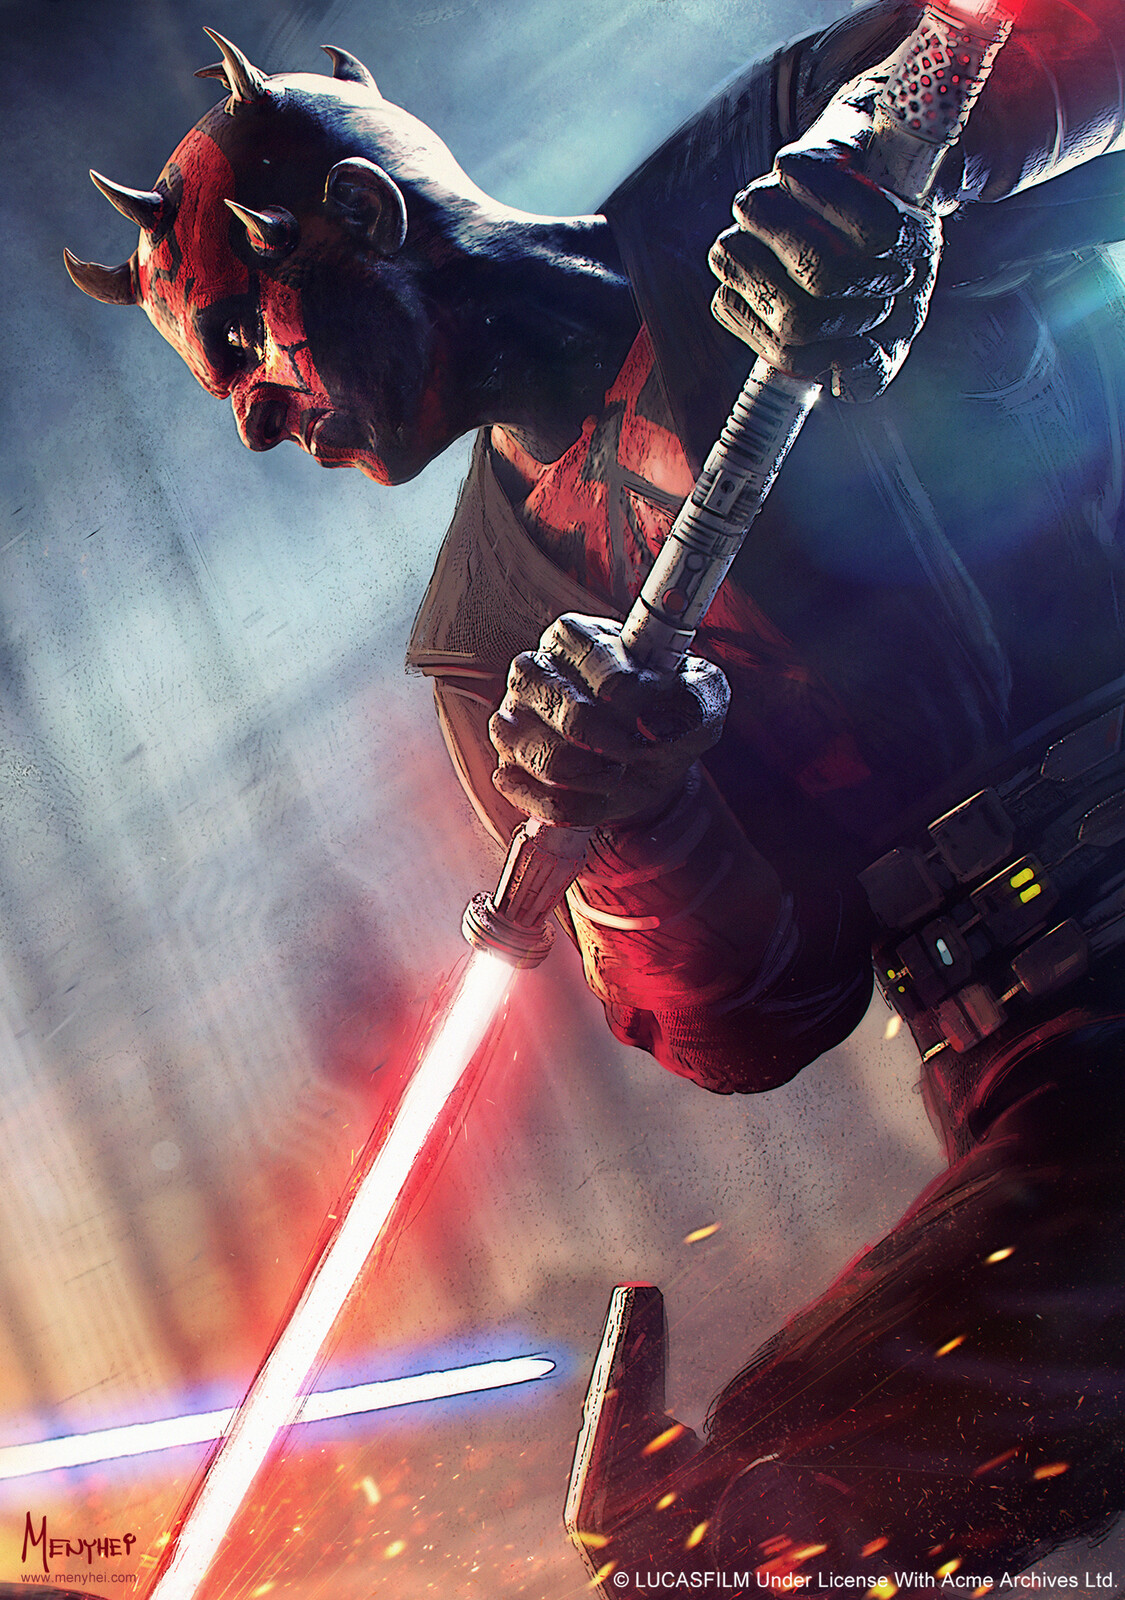 "Every choice you have made, has led you to this moment" Maul